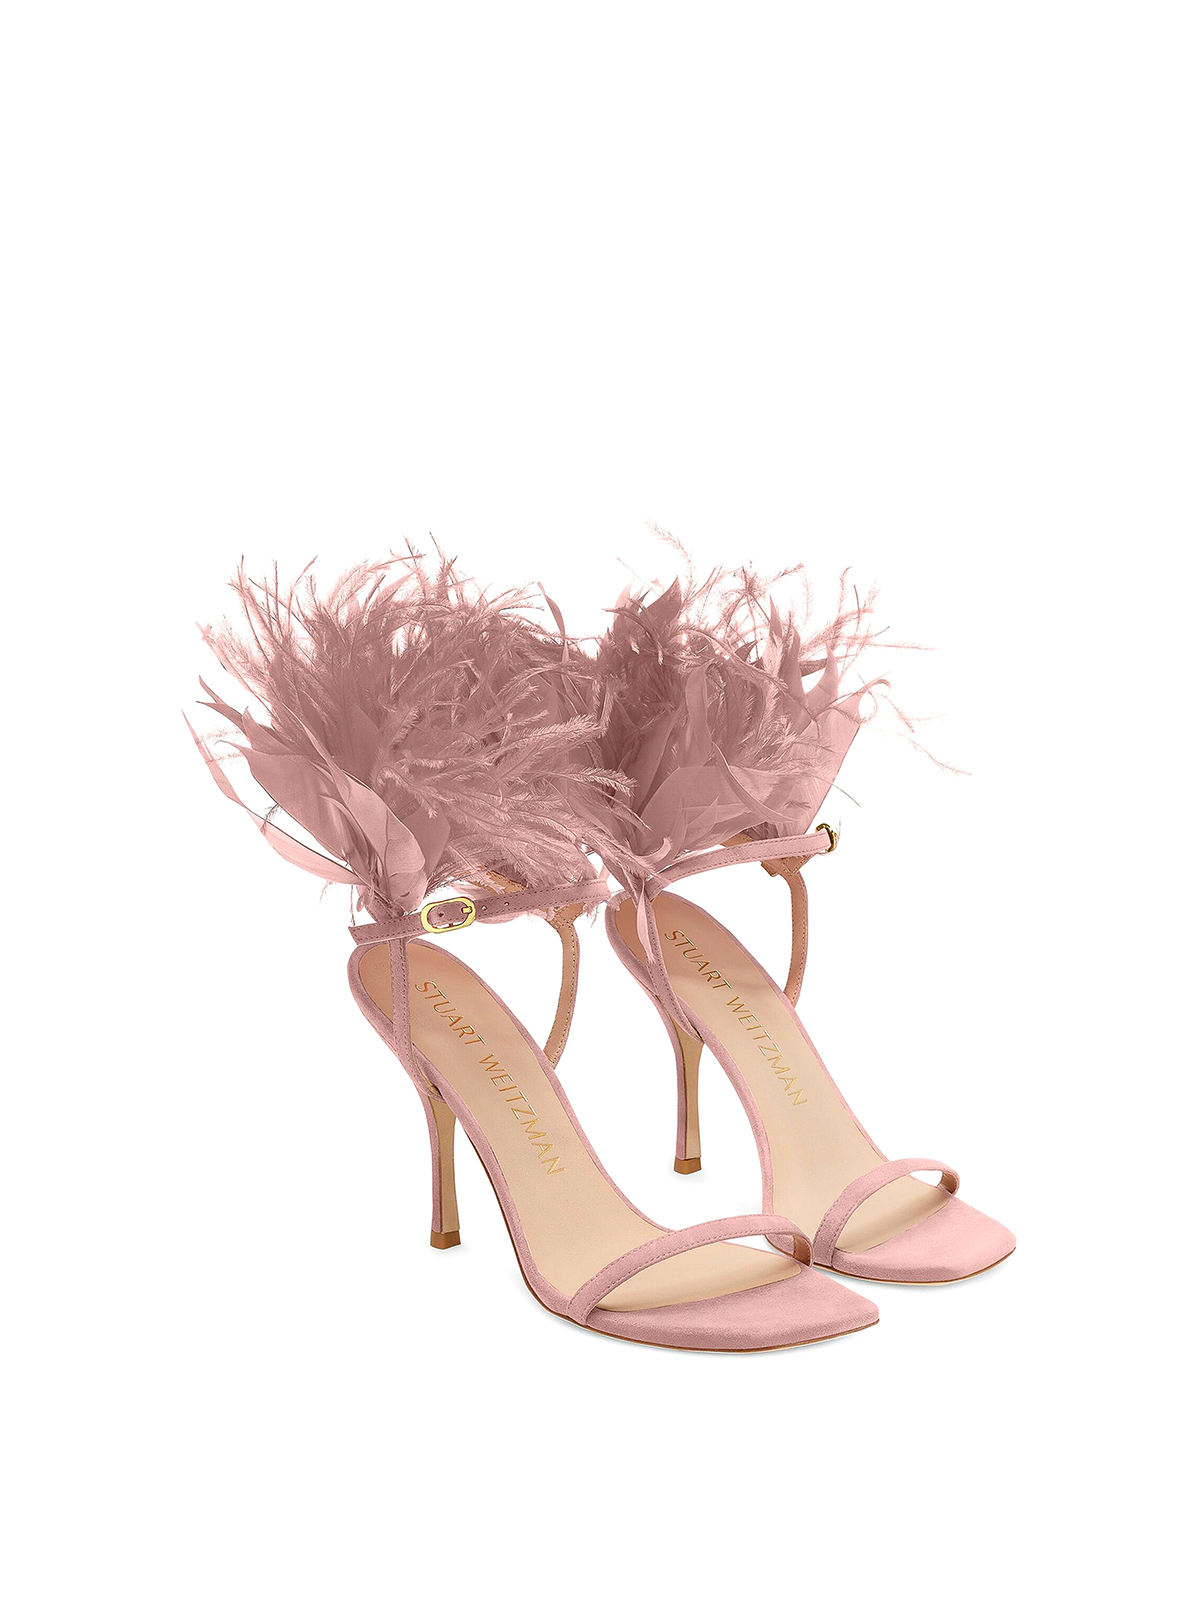 Shop Stuart Weitzman Strap Sandals Decorated With Feathers In Pink